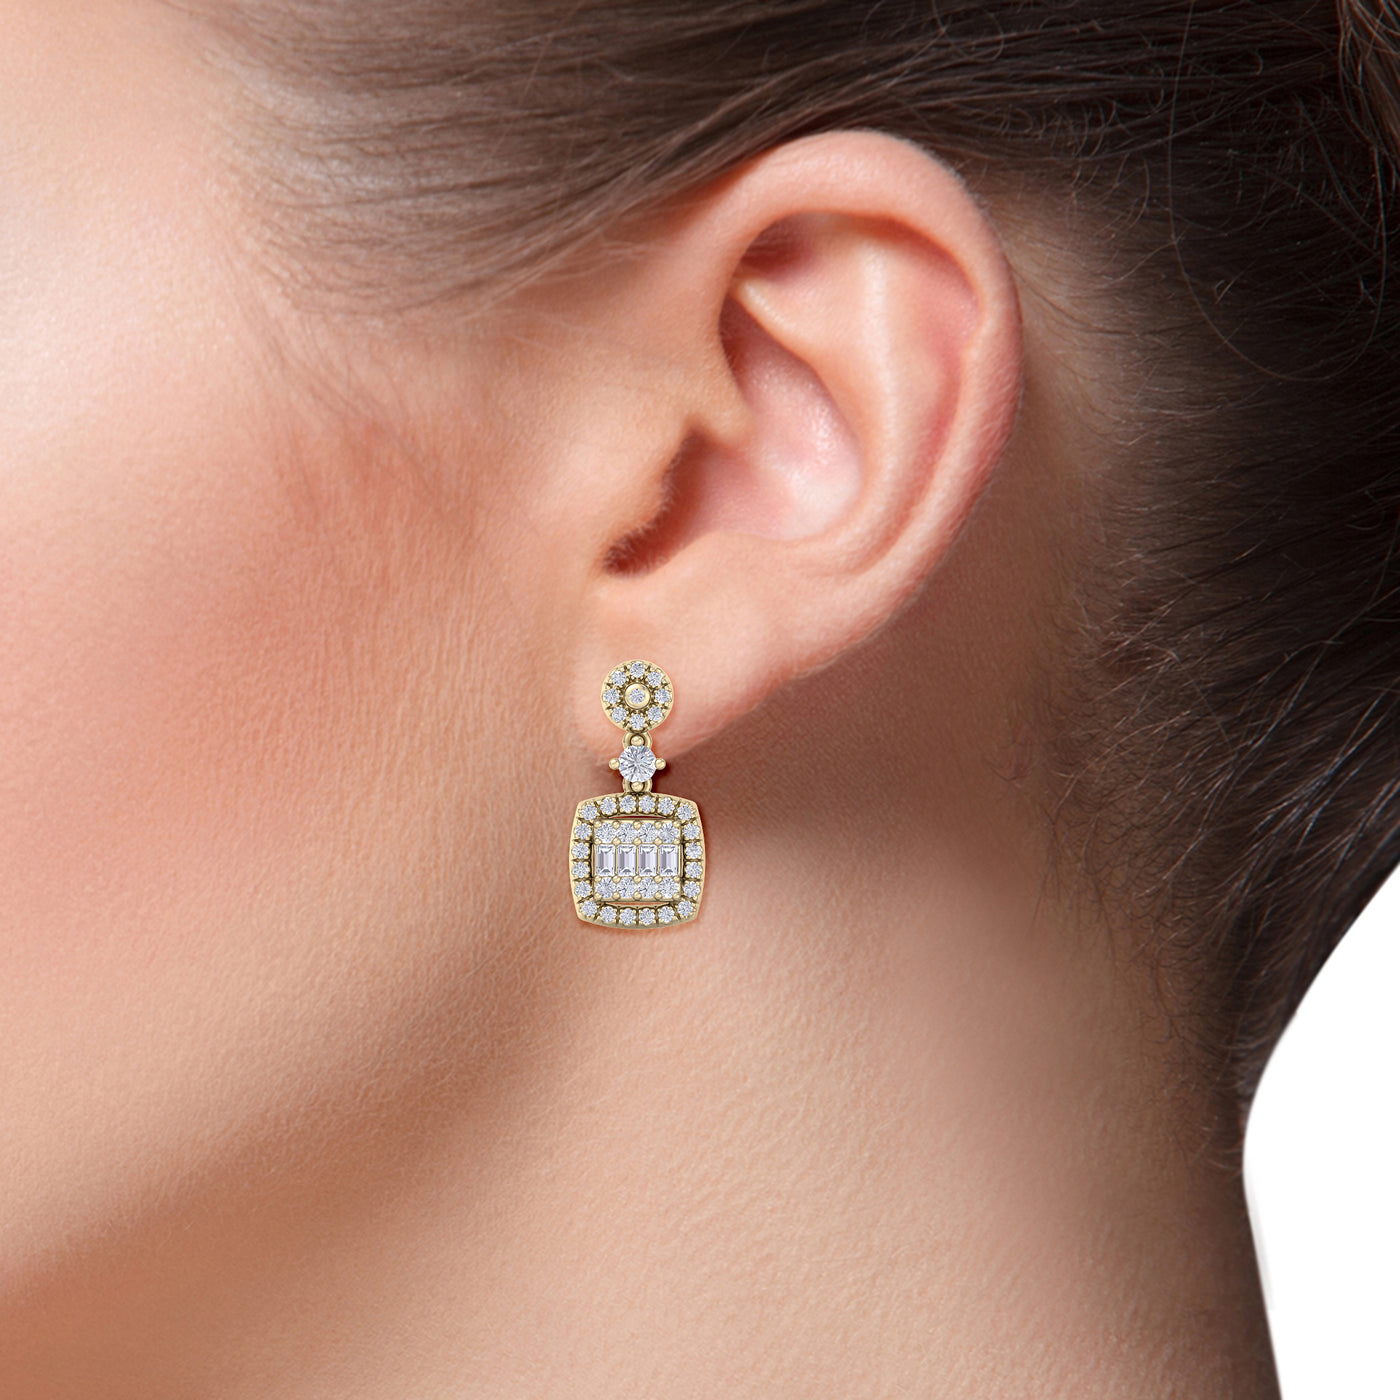 Drop earrings in yellow gold with white diamonds of 0.61 ct in weight